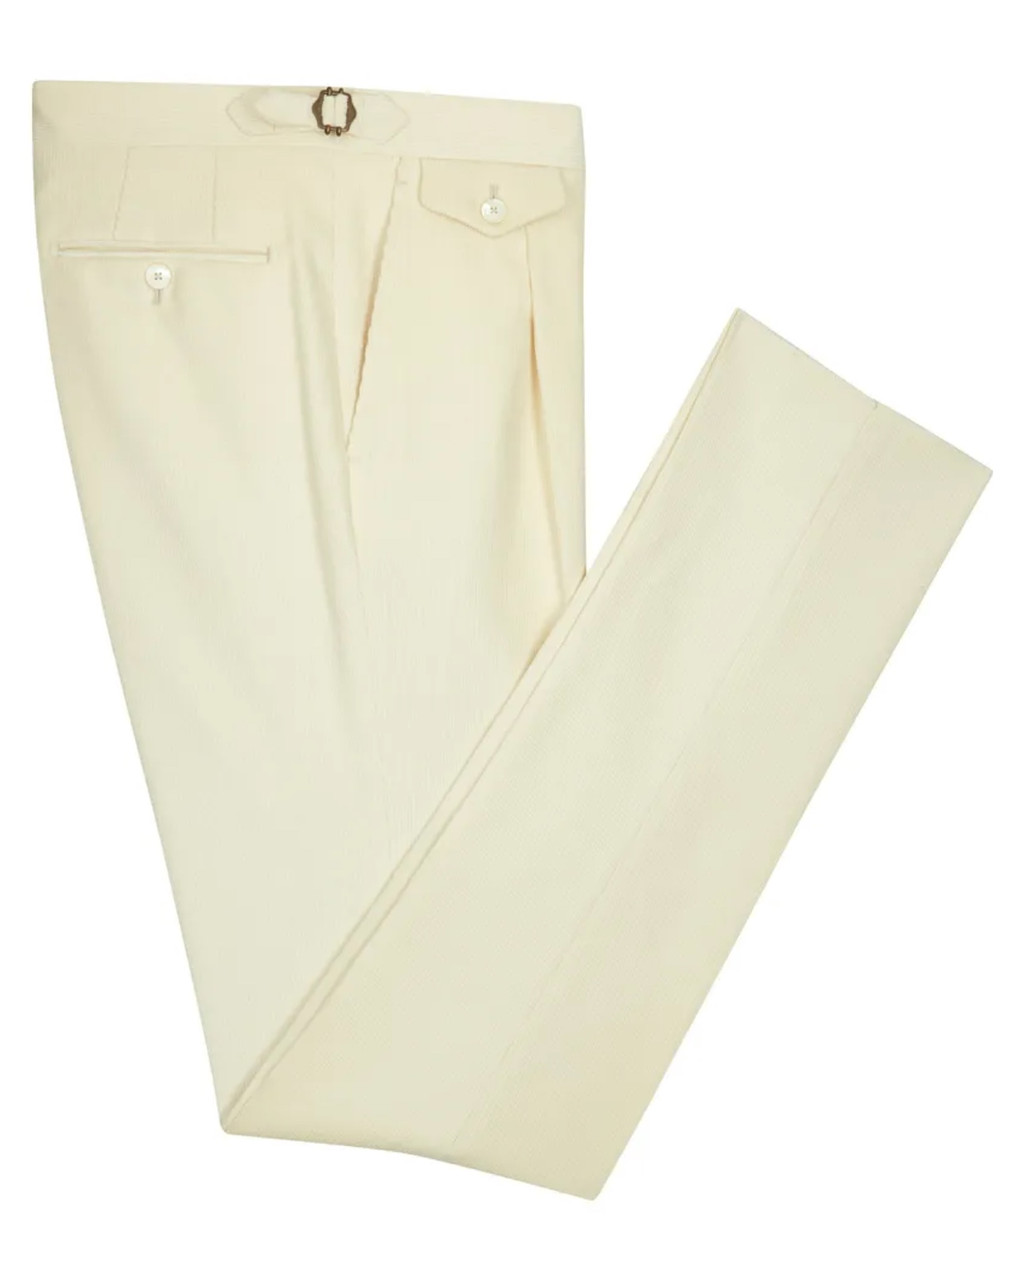 Buy Cream and Black Combo of 2 Solid Women Pant Cotton Slub for Best Price,  Reviews, Free Shipping